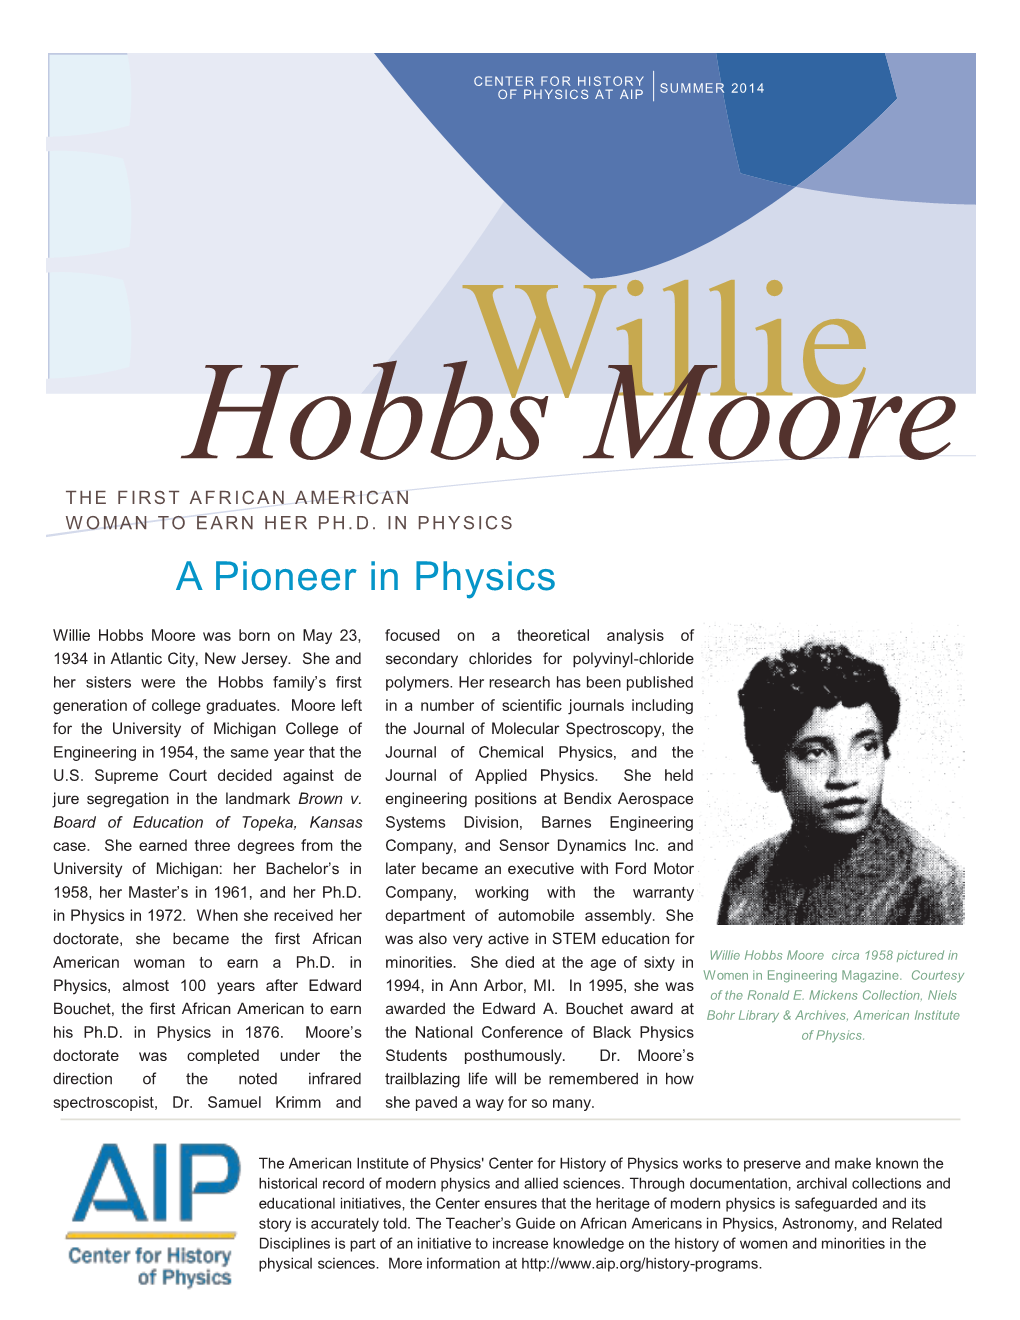 Hobbs Moore Was Born on May 23, Focused on a Theoretical Analysis of 1934 in Atlantic City, New Jersey